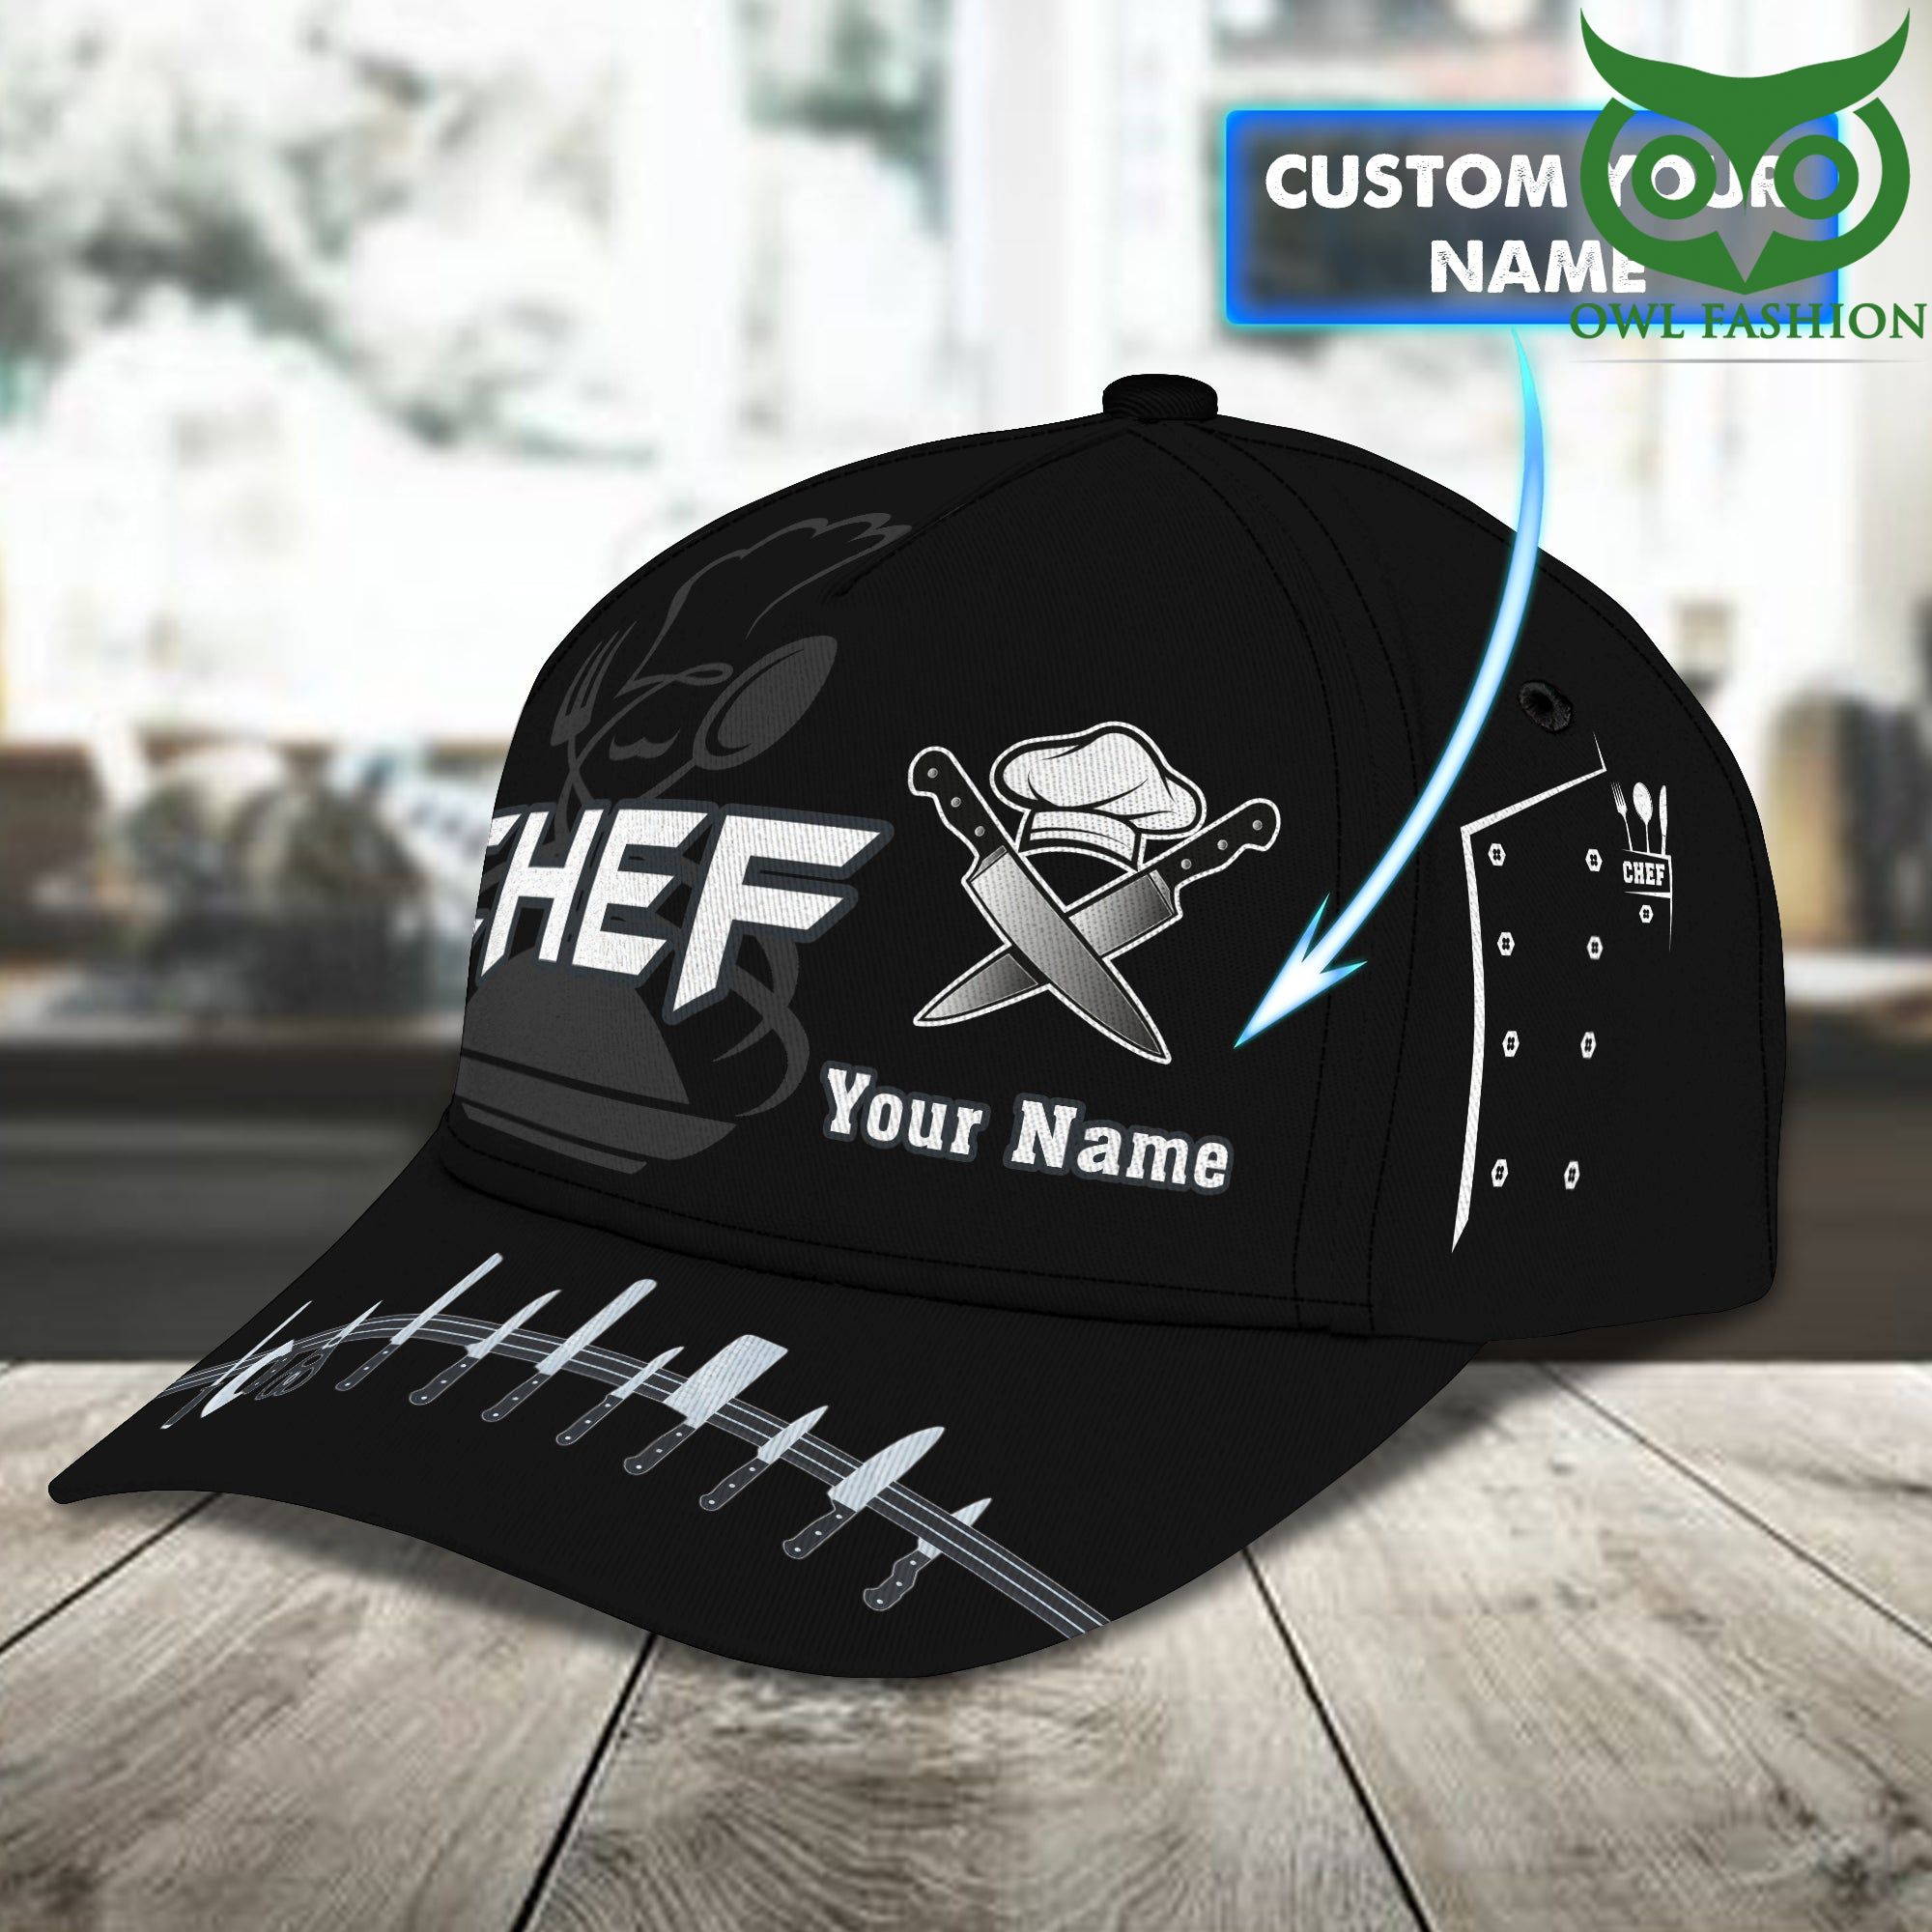 13 Personalized CHEF Knives black 3D Classic cap